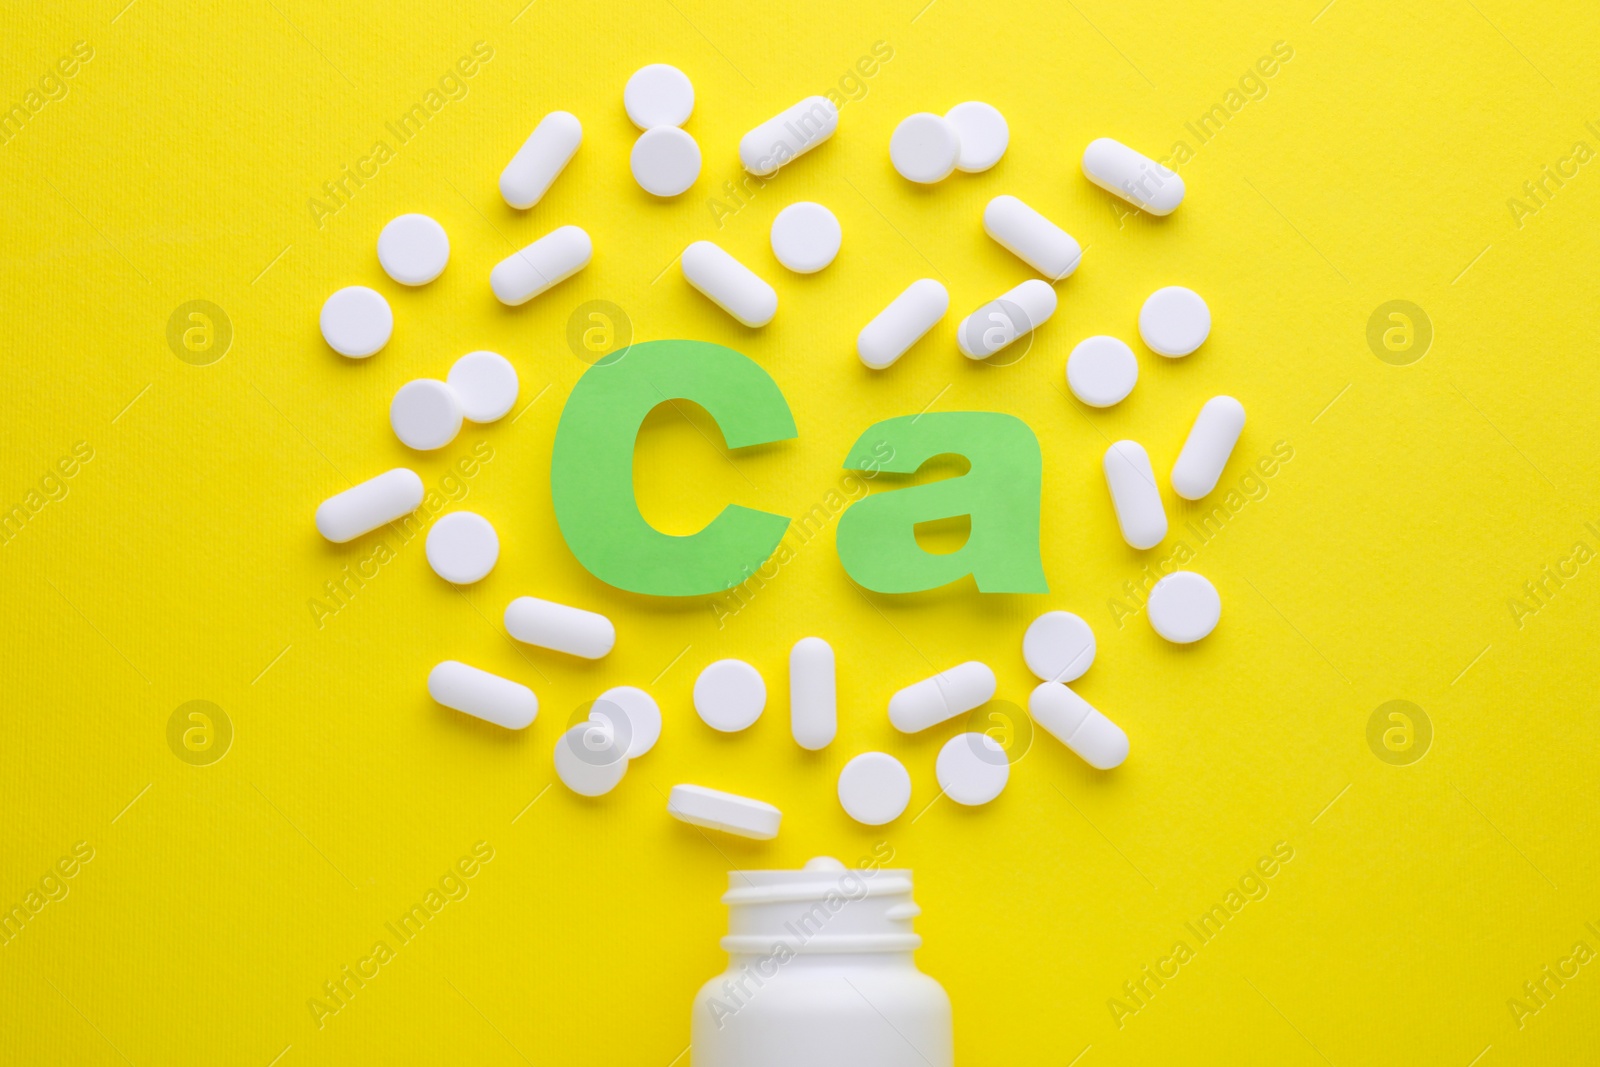 Photo of Pills, open bottle and calcium symbol made of green letters on yellow background, flat lay